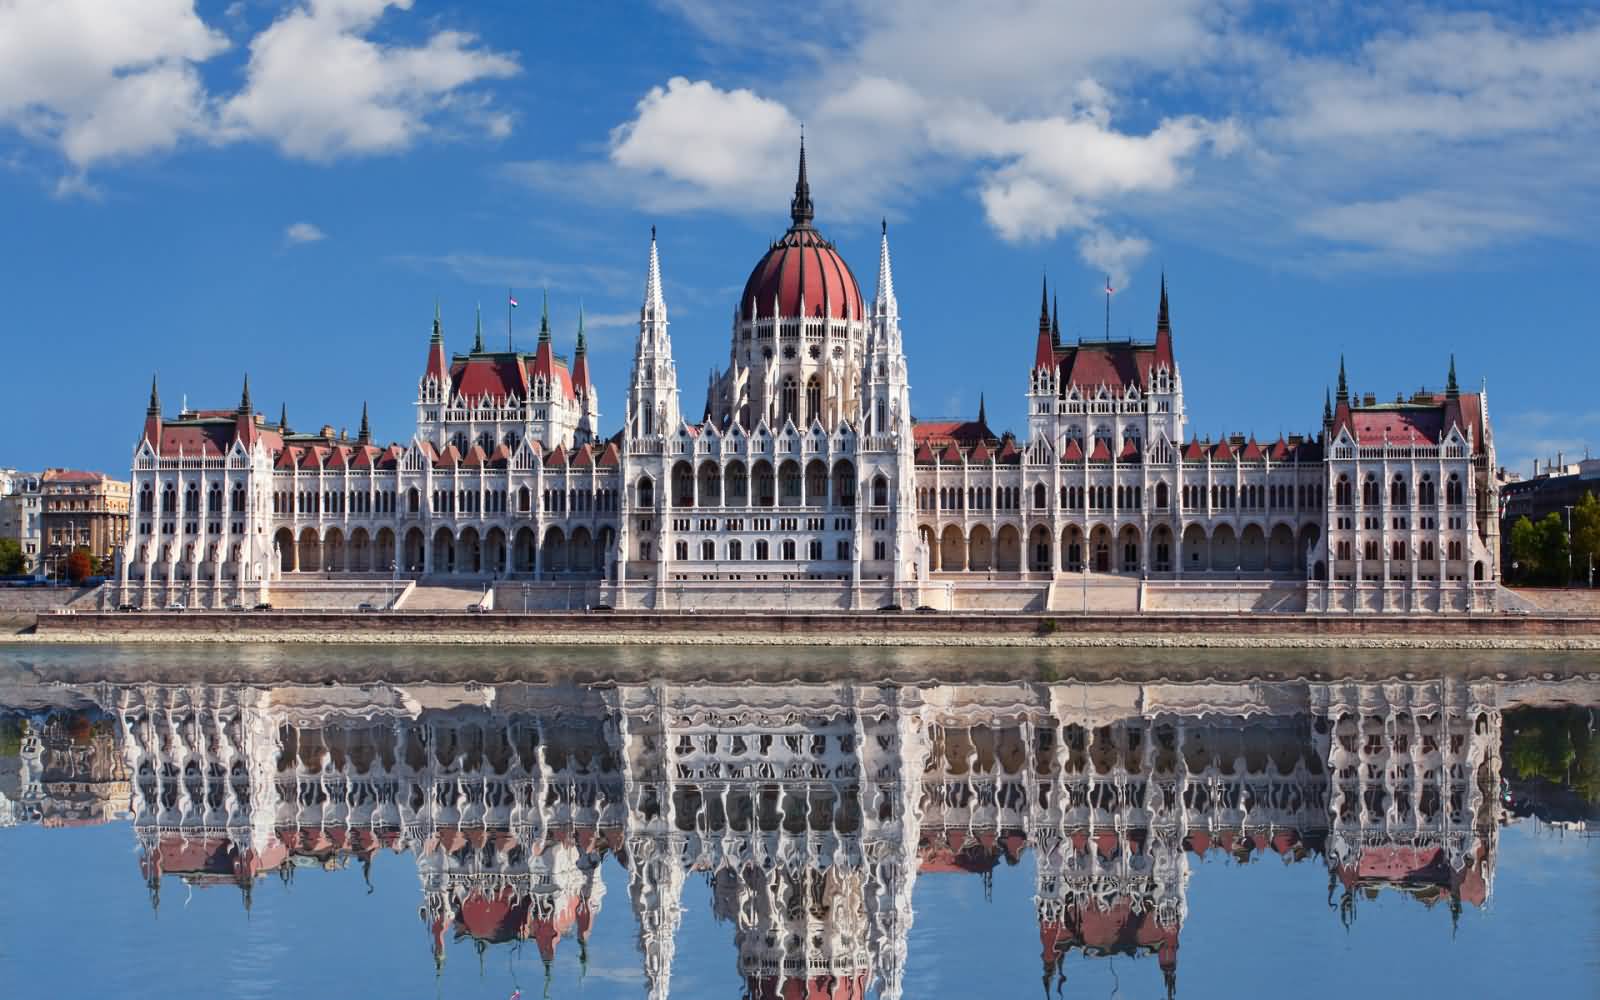 Reflection Of Hungarian Parliament Building In Danube River